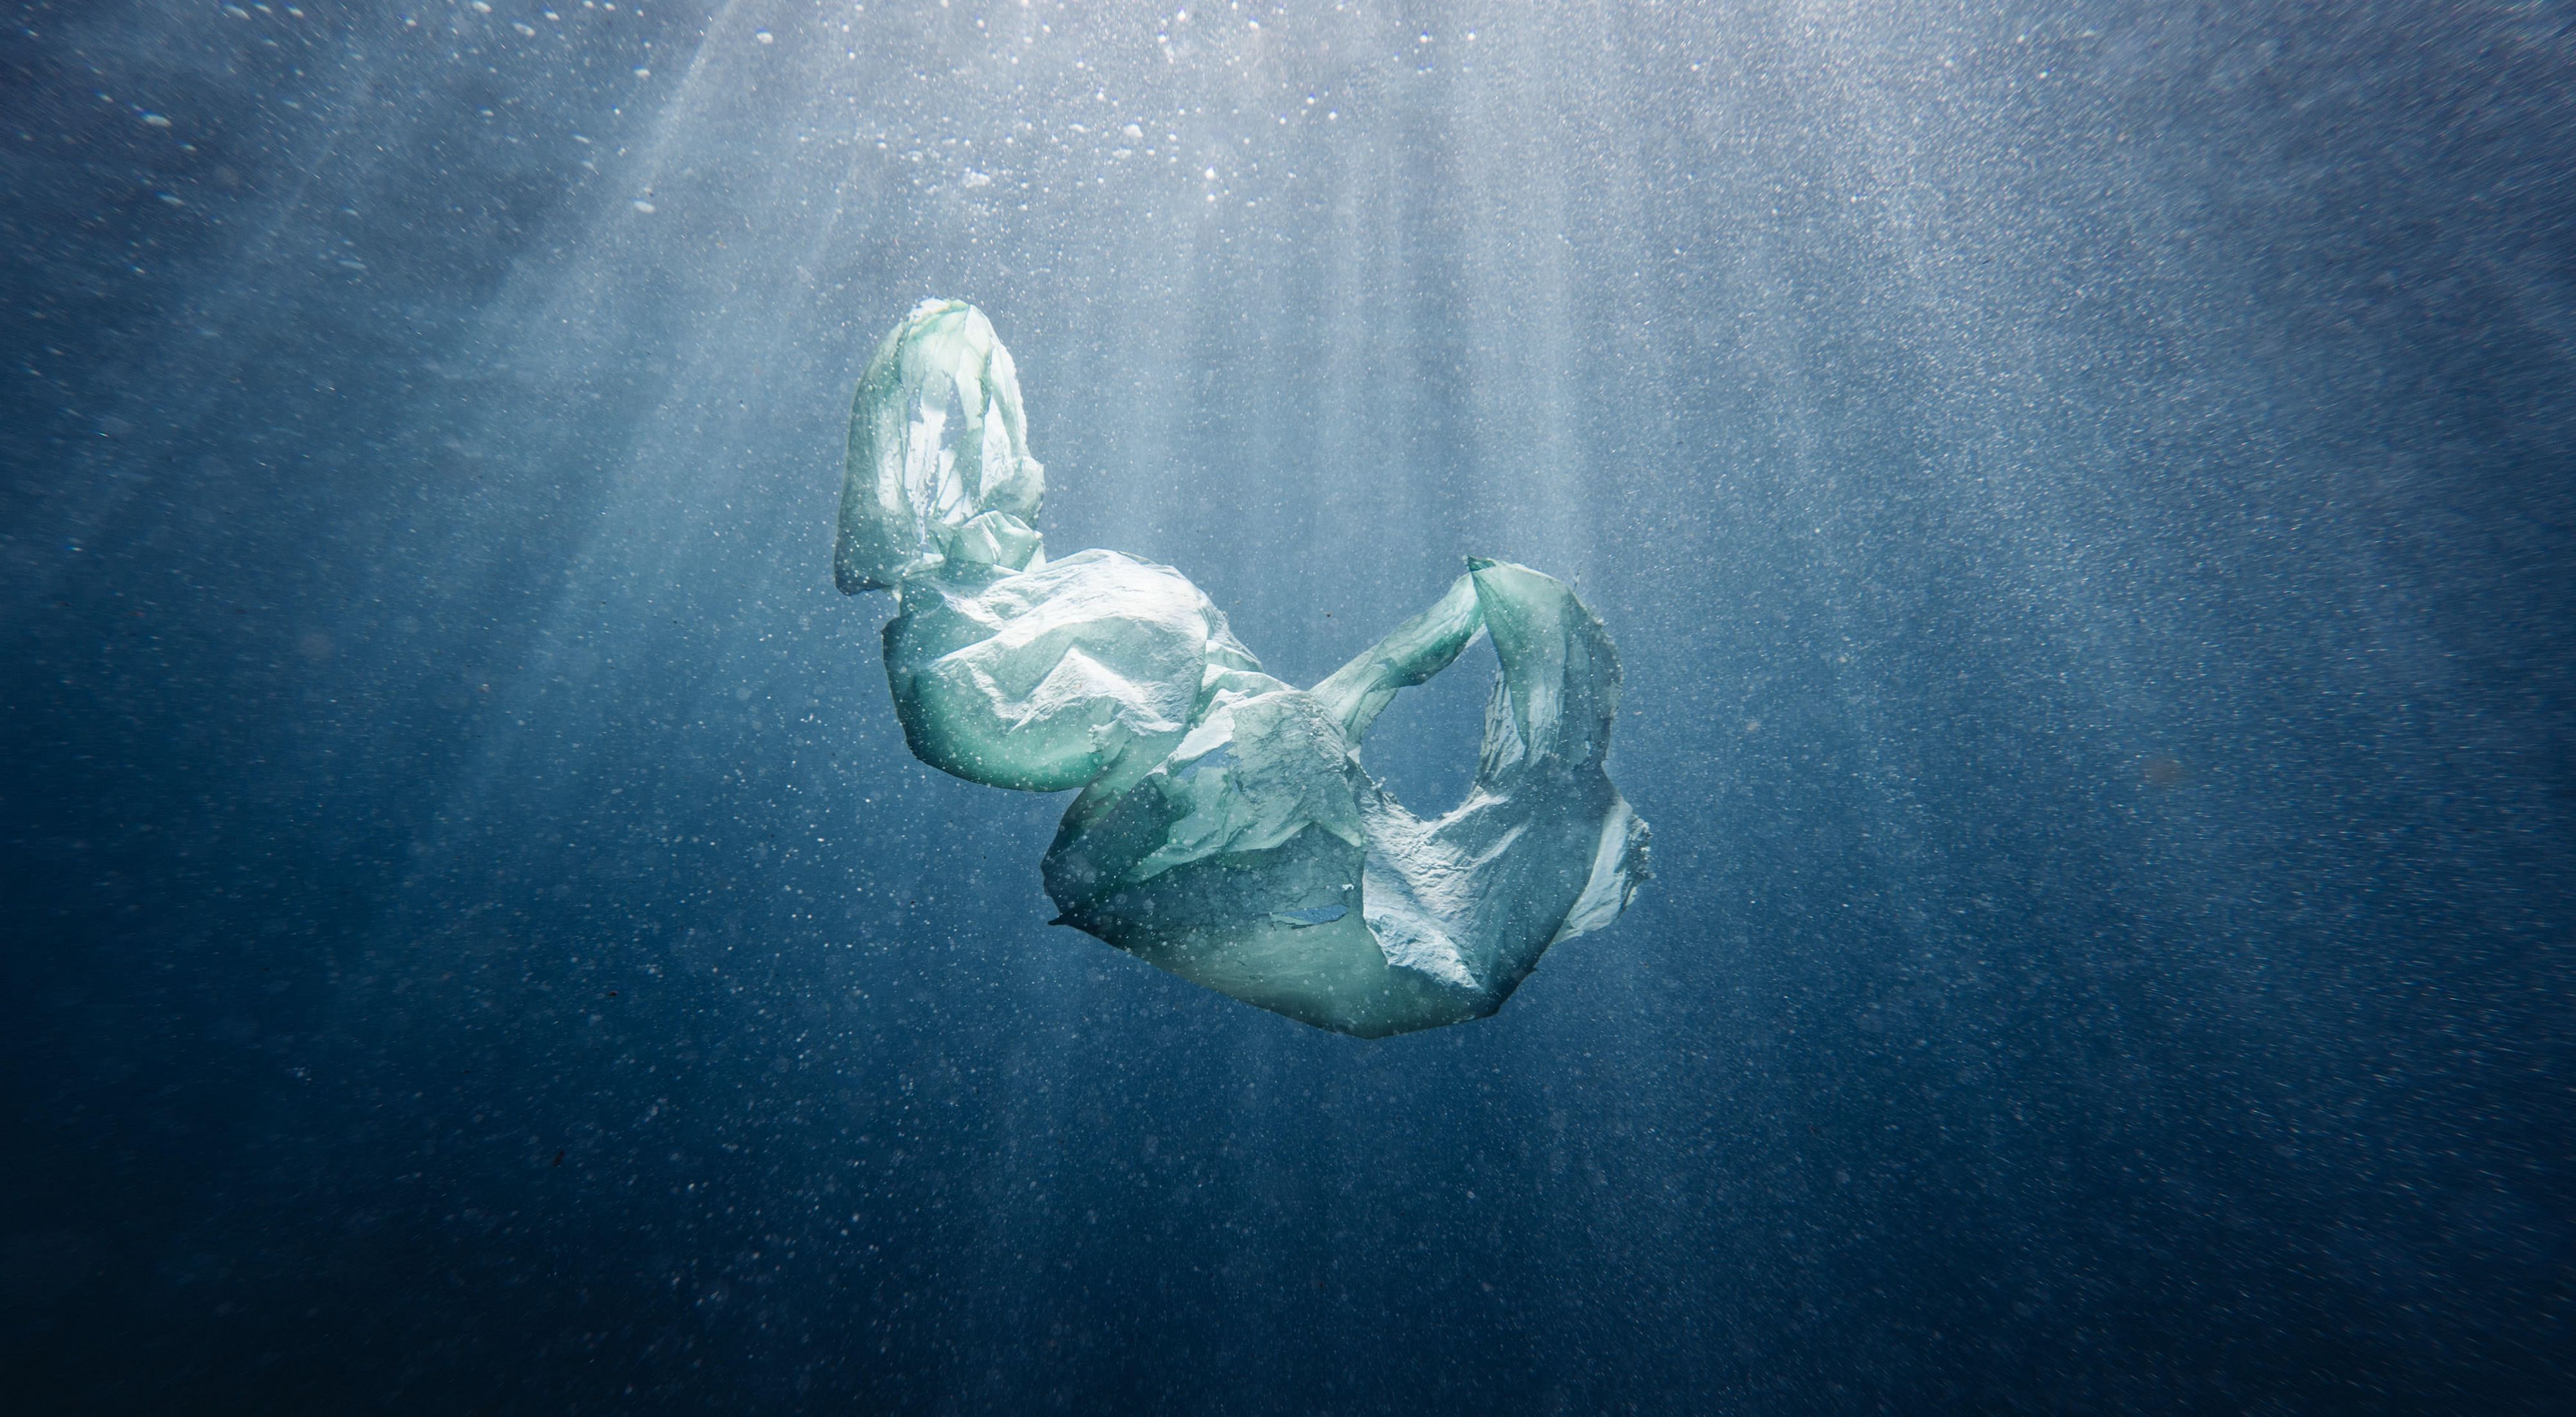 A plastic bag floats in water.